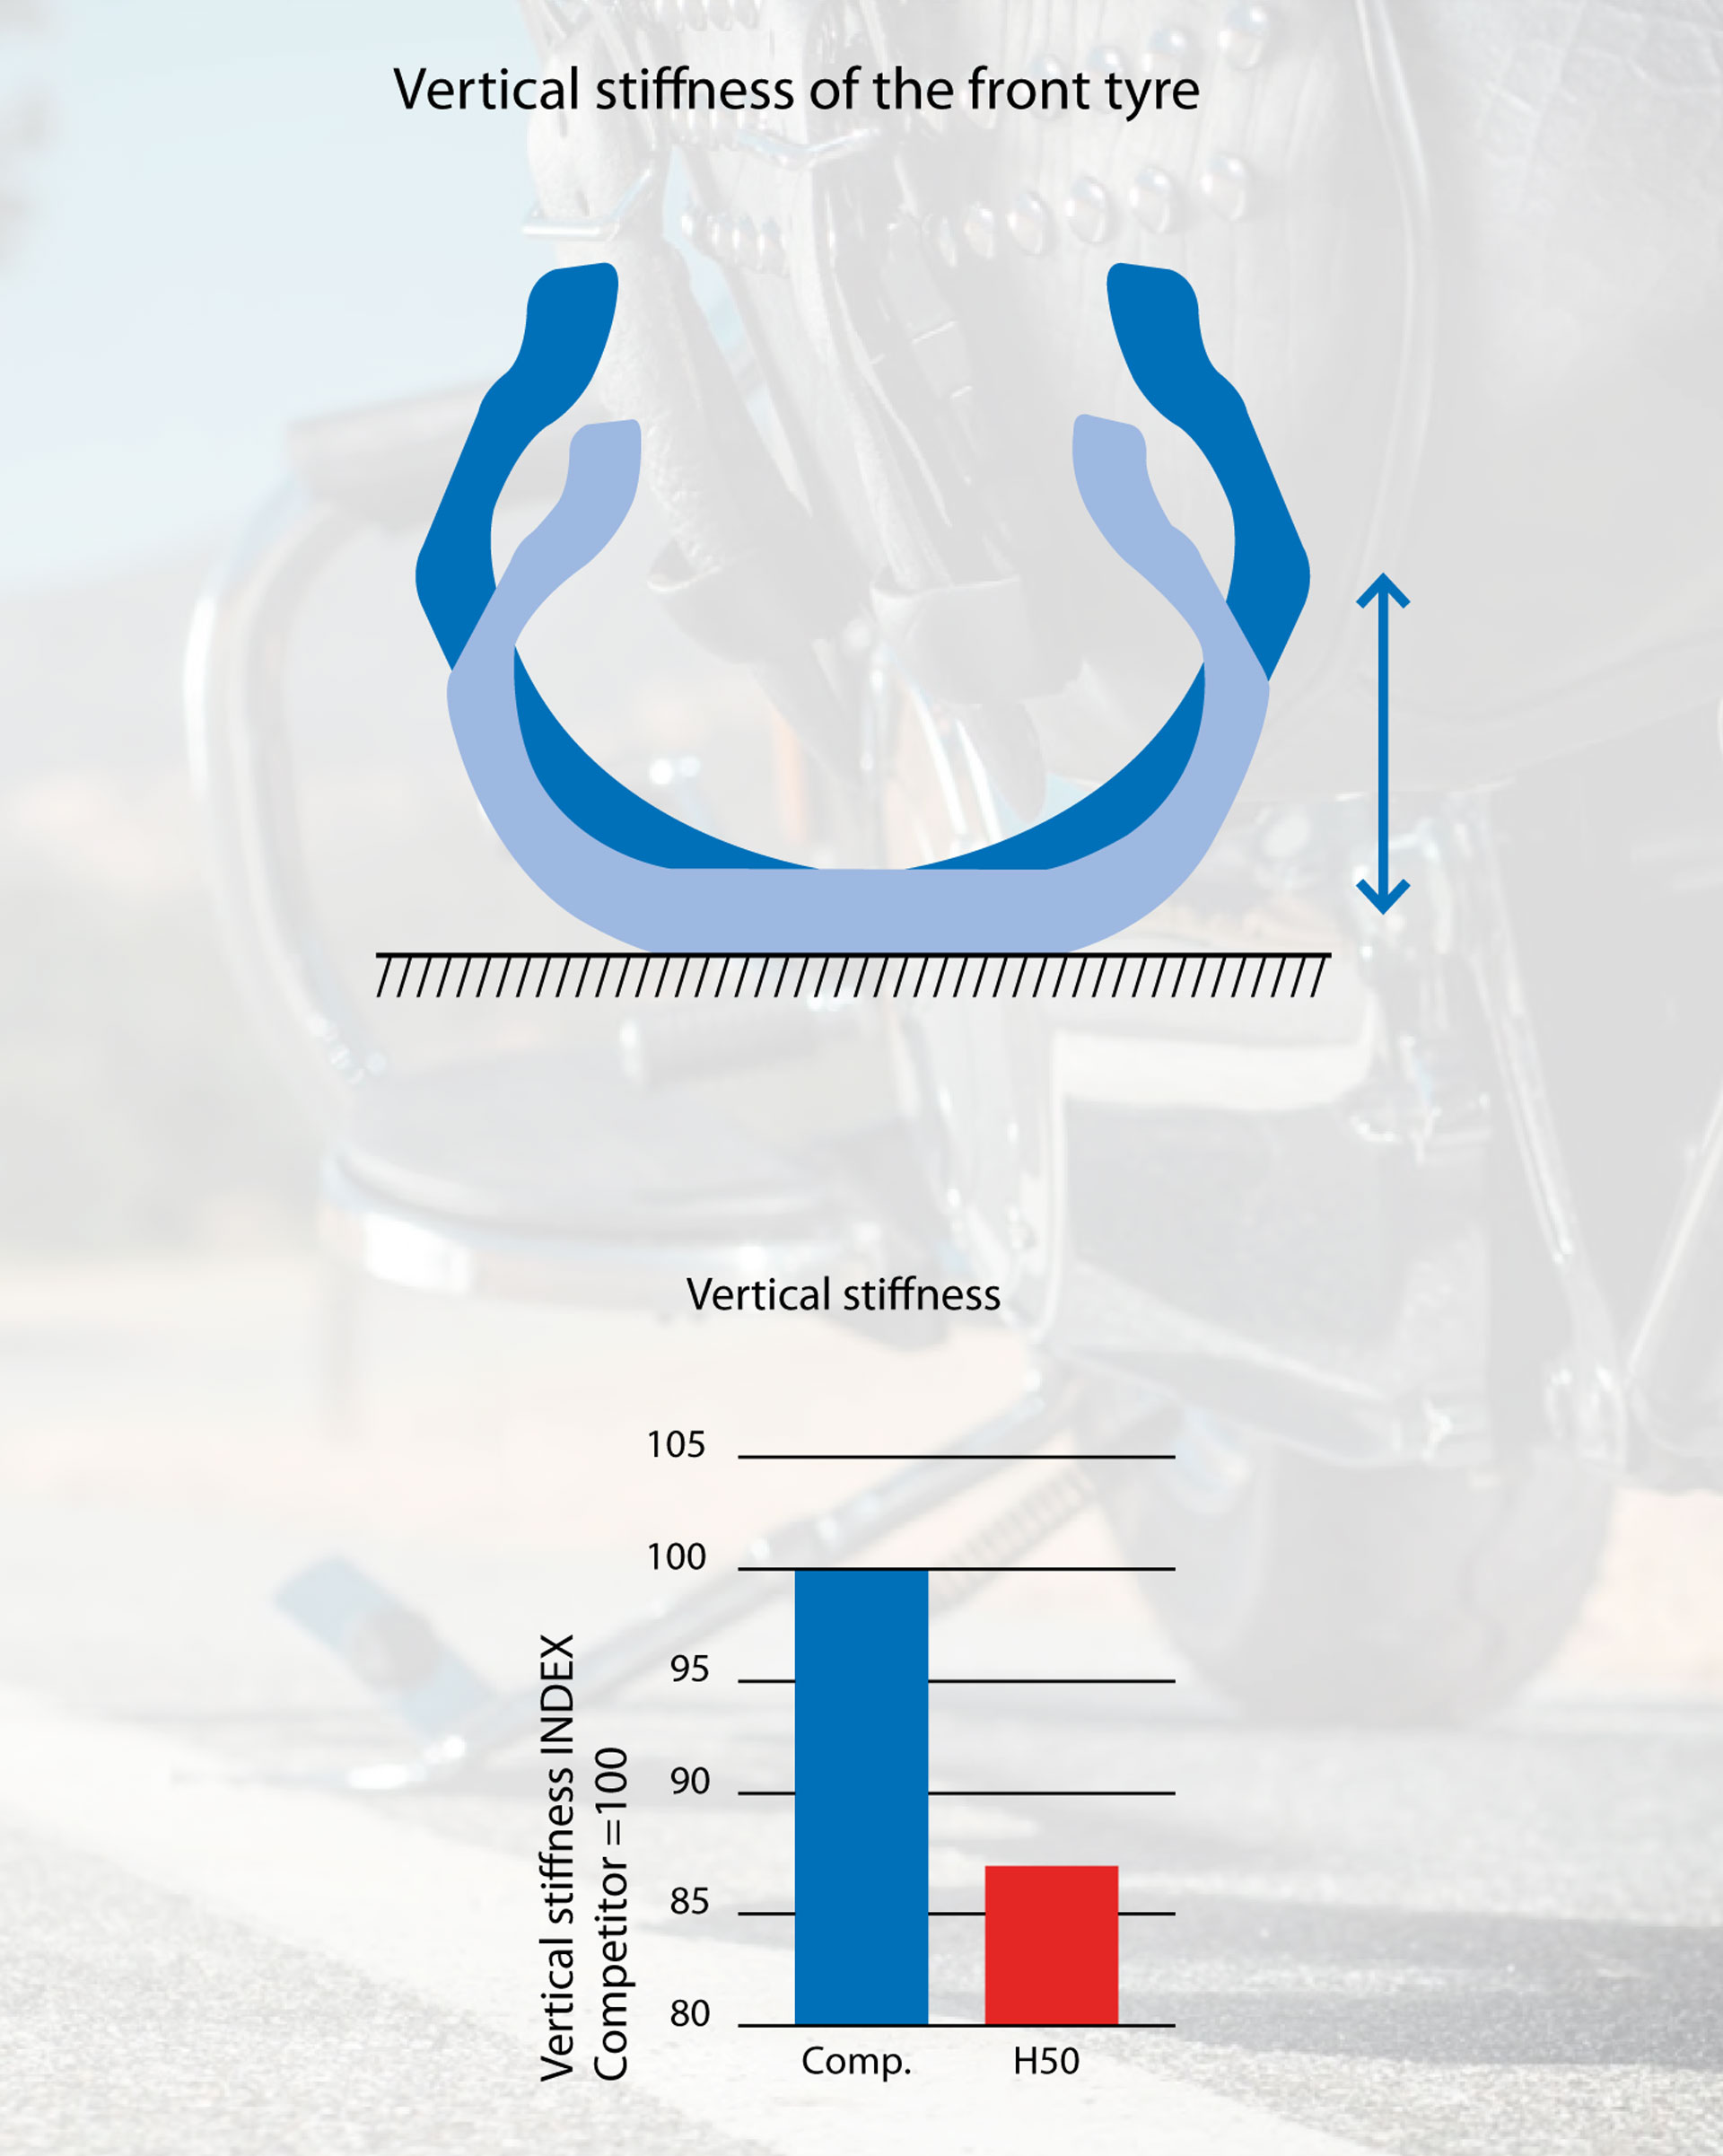 Assisting with the contact patch and comfort is the tyre vertical stiffness, which is lower than the competitor to provide better bump absorption, plus plenty of contact, without adversely effecting handling